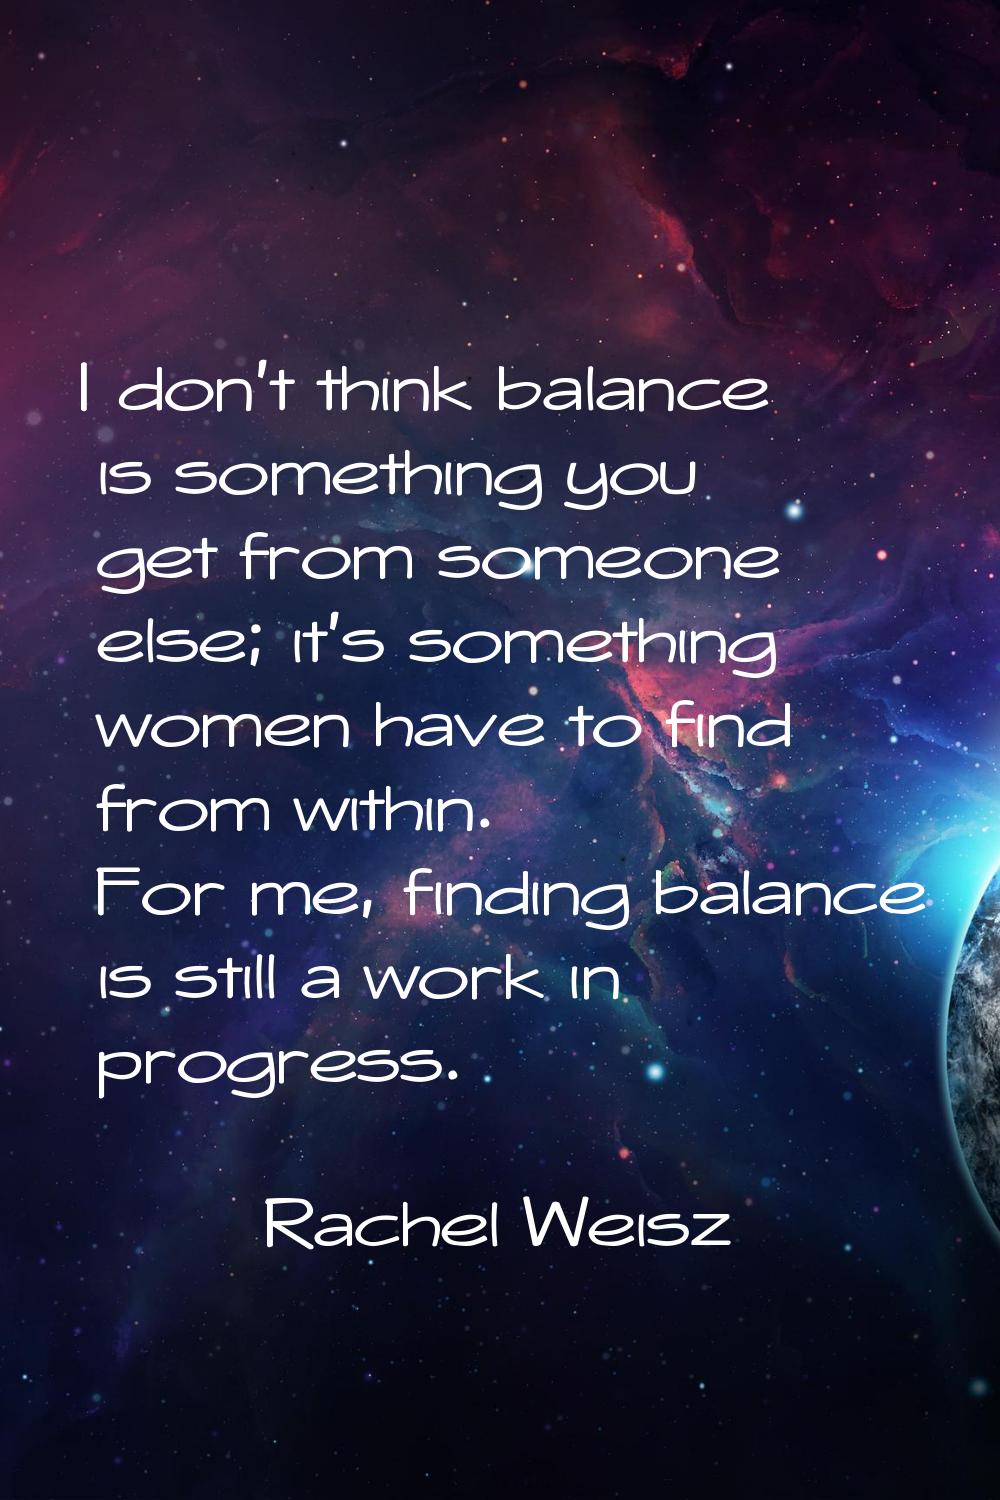 I don't think balance is something you get from someone else; it's something women have to find fro